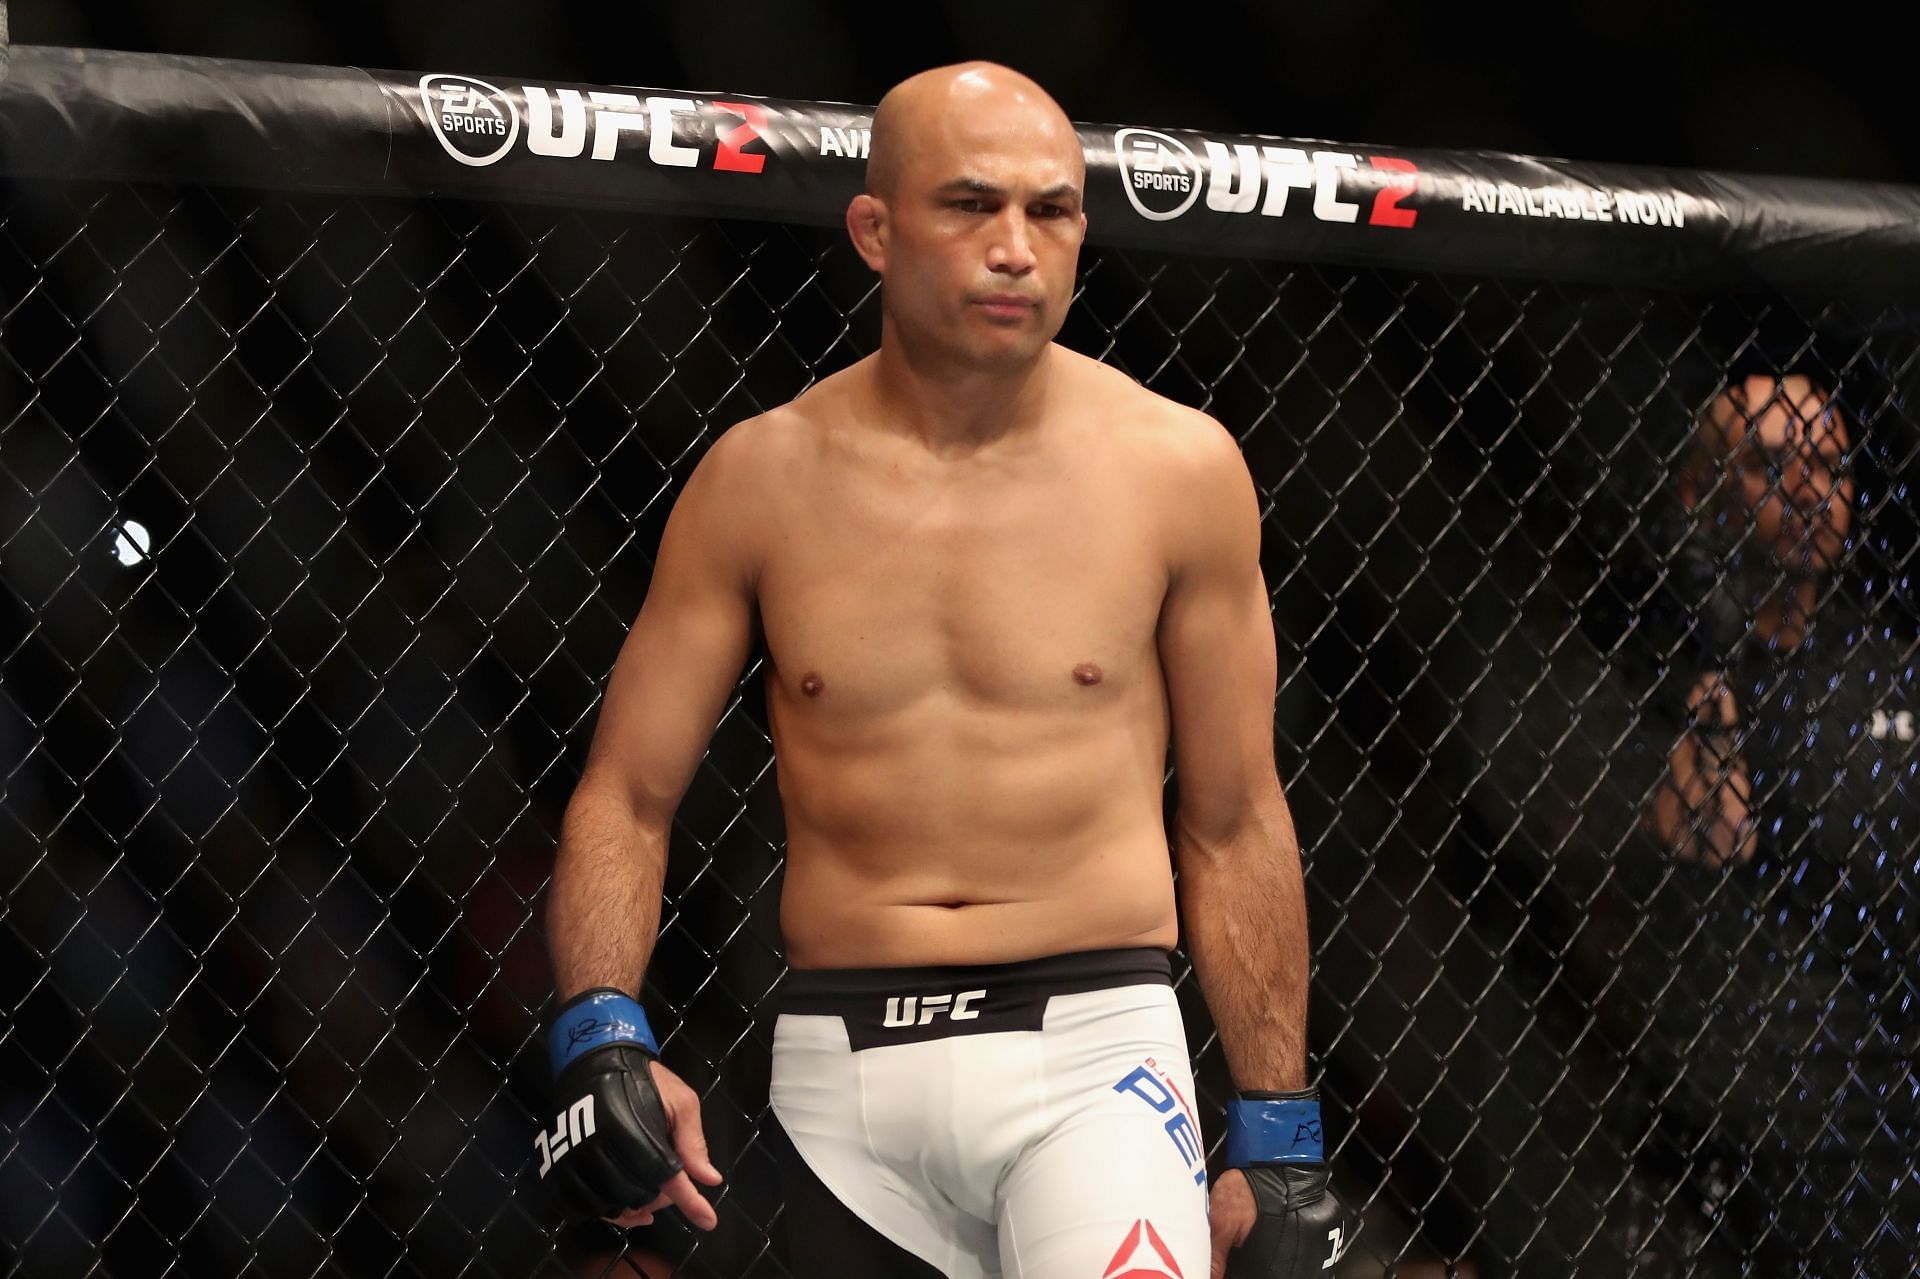 Hall of Famer and former two-division champion &#039;The Prodigy&#039; B.J. Penn